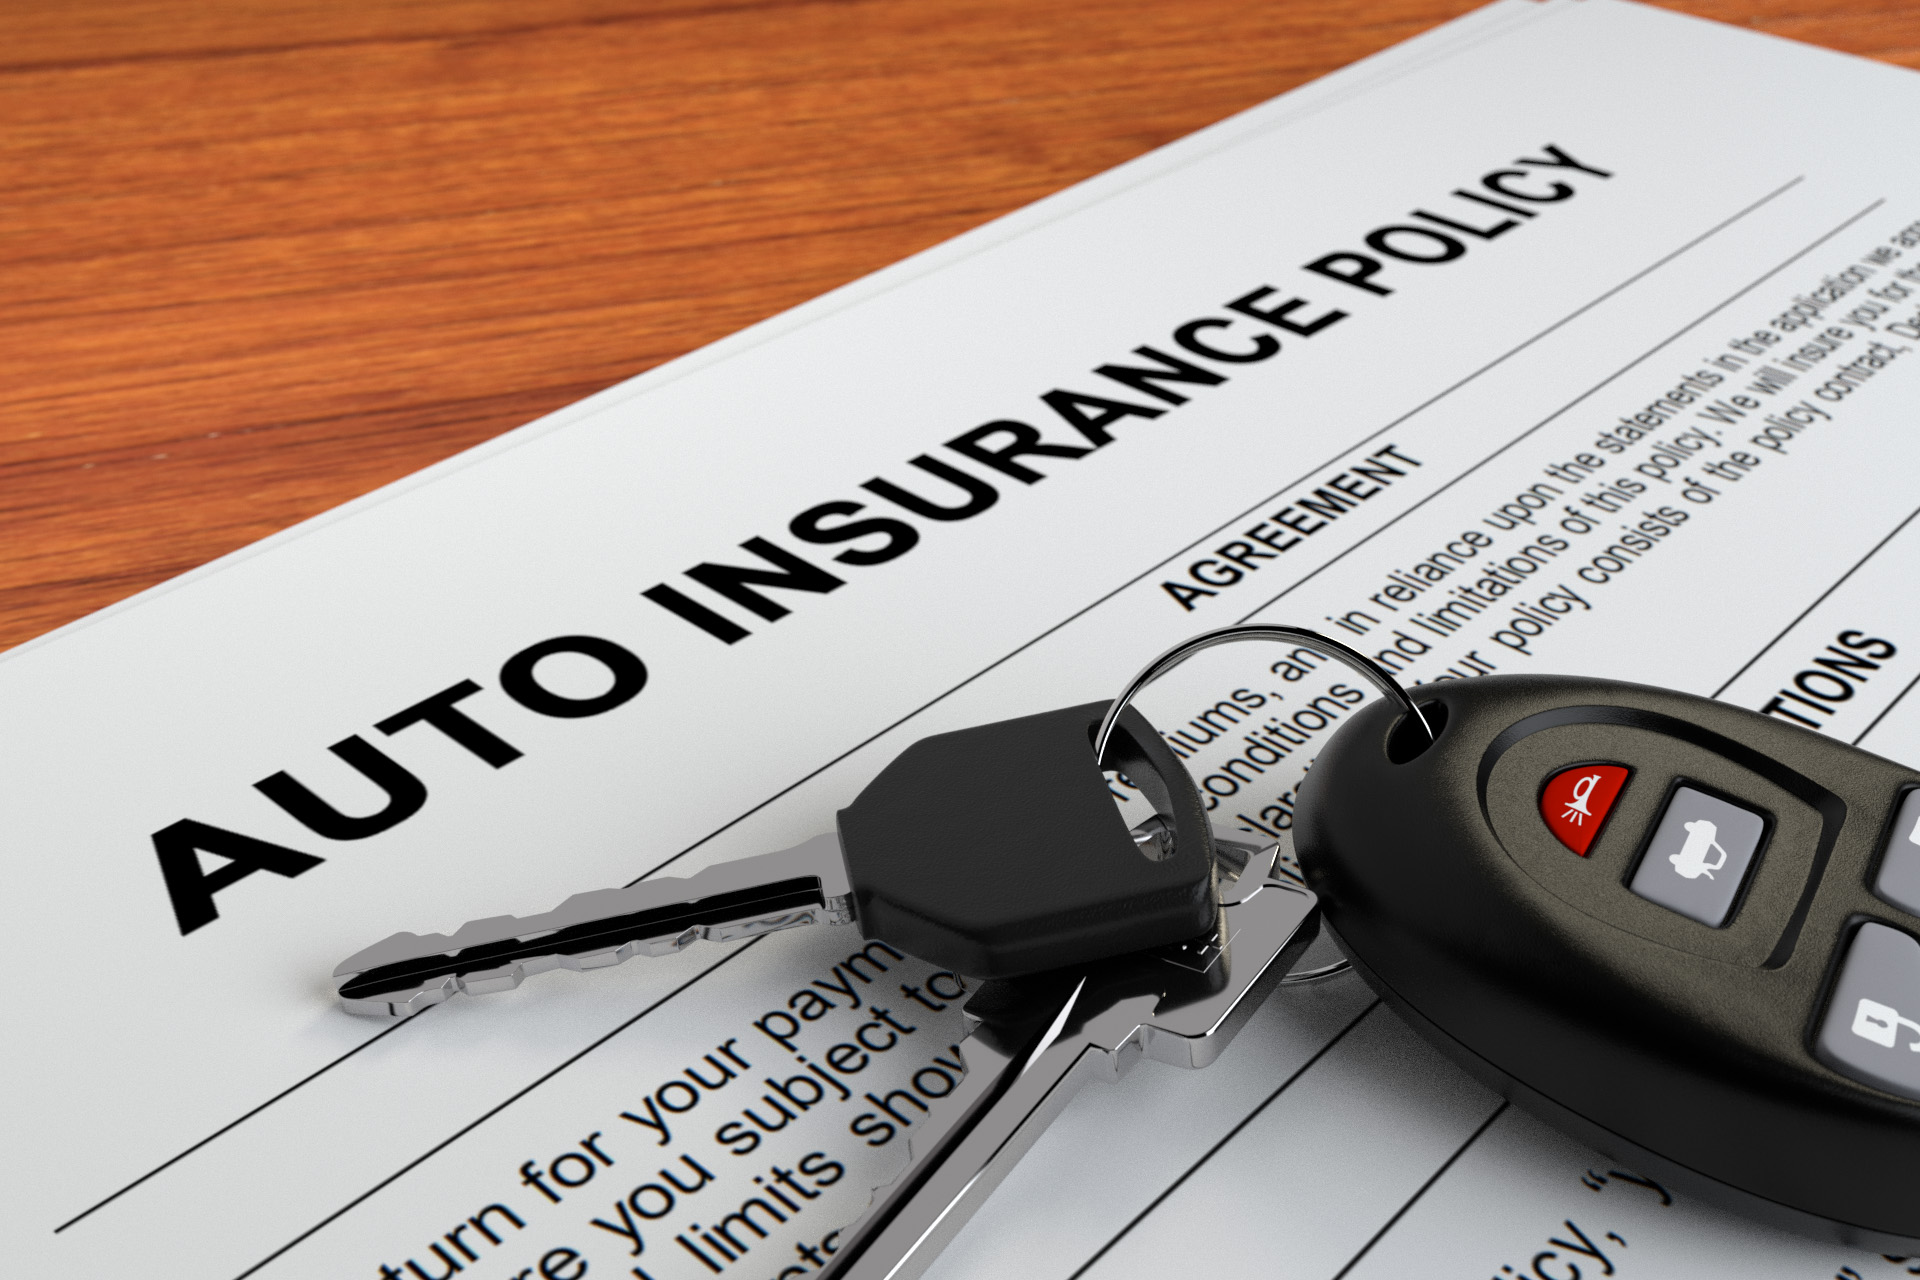 Auto insurance policy car keys free image download